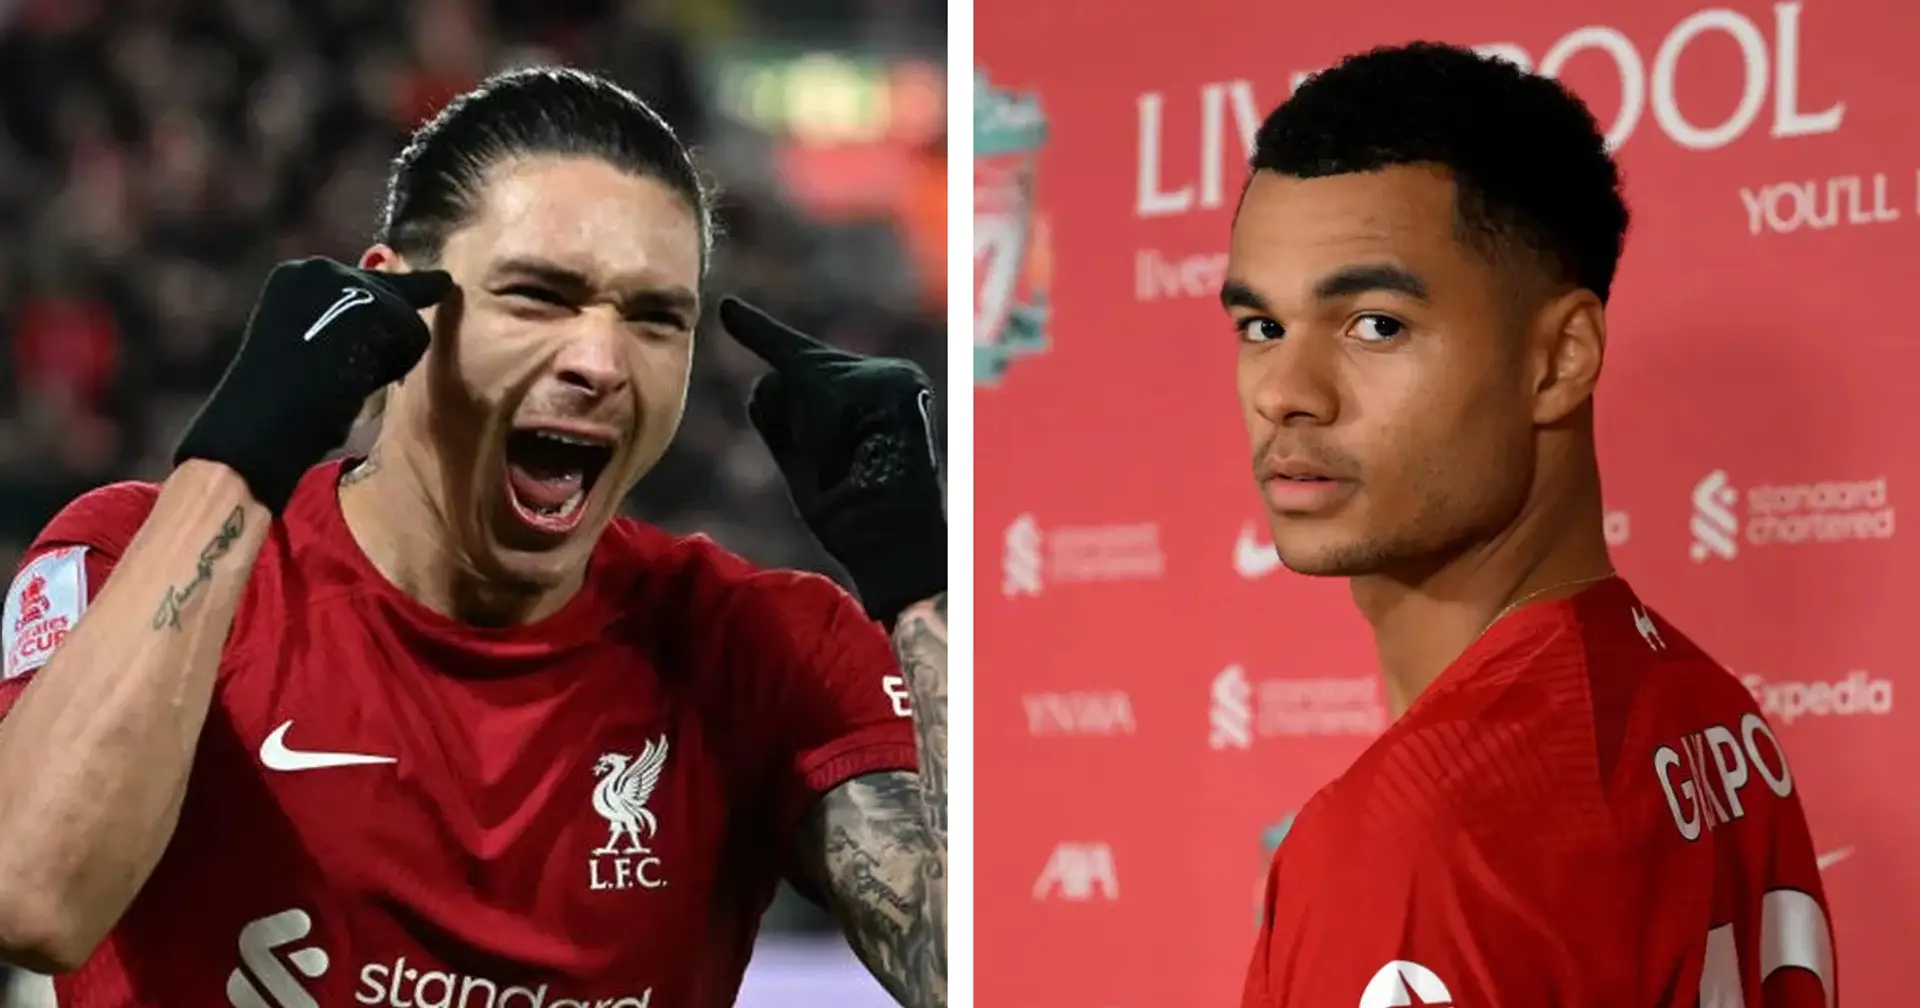 Nunez, Carvalho, Gakpo, Arthur: how would you rate Liverpool transfers last season from 1 to 10?